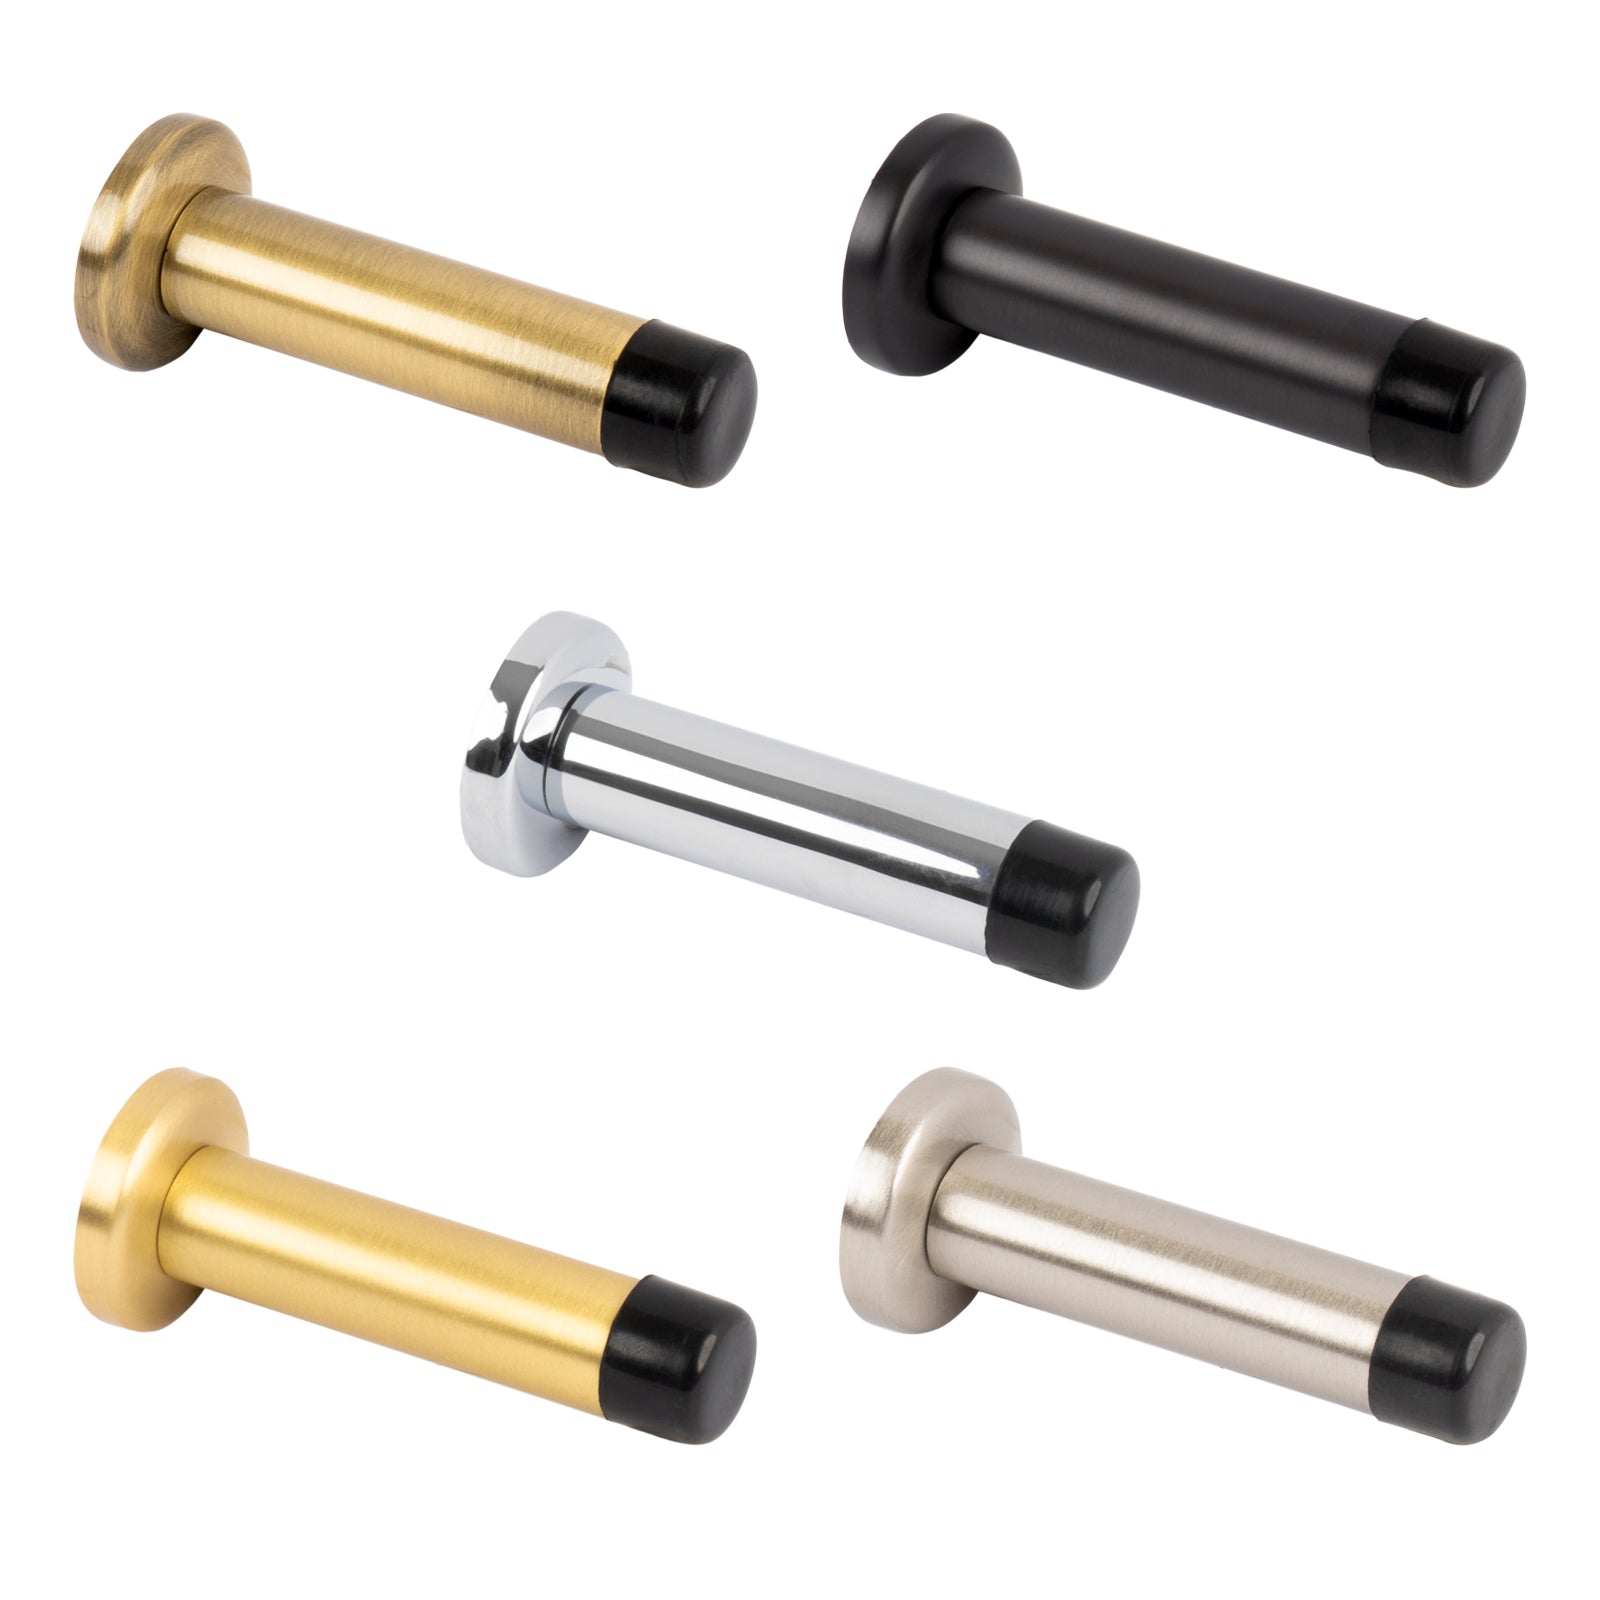 Wall Mounted Door Stops With Rose, Solid Brass Door Stoppers In Five Finishes